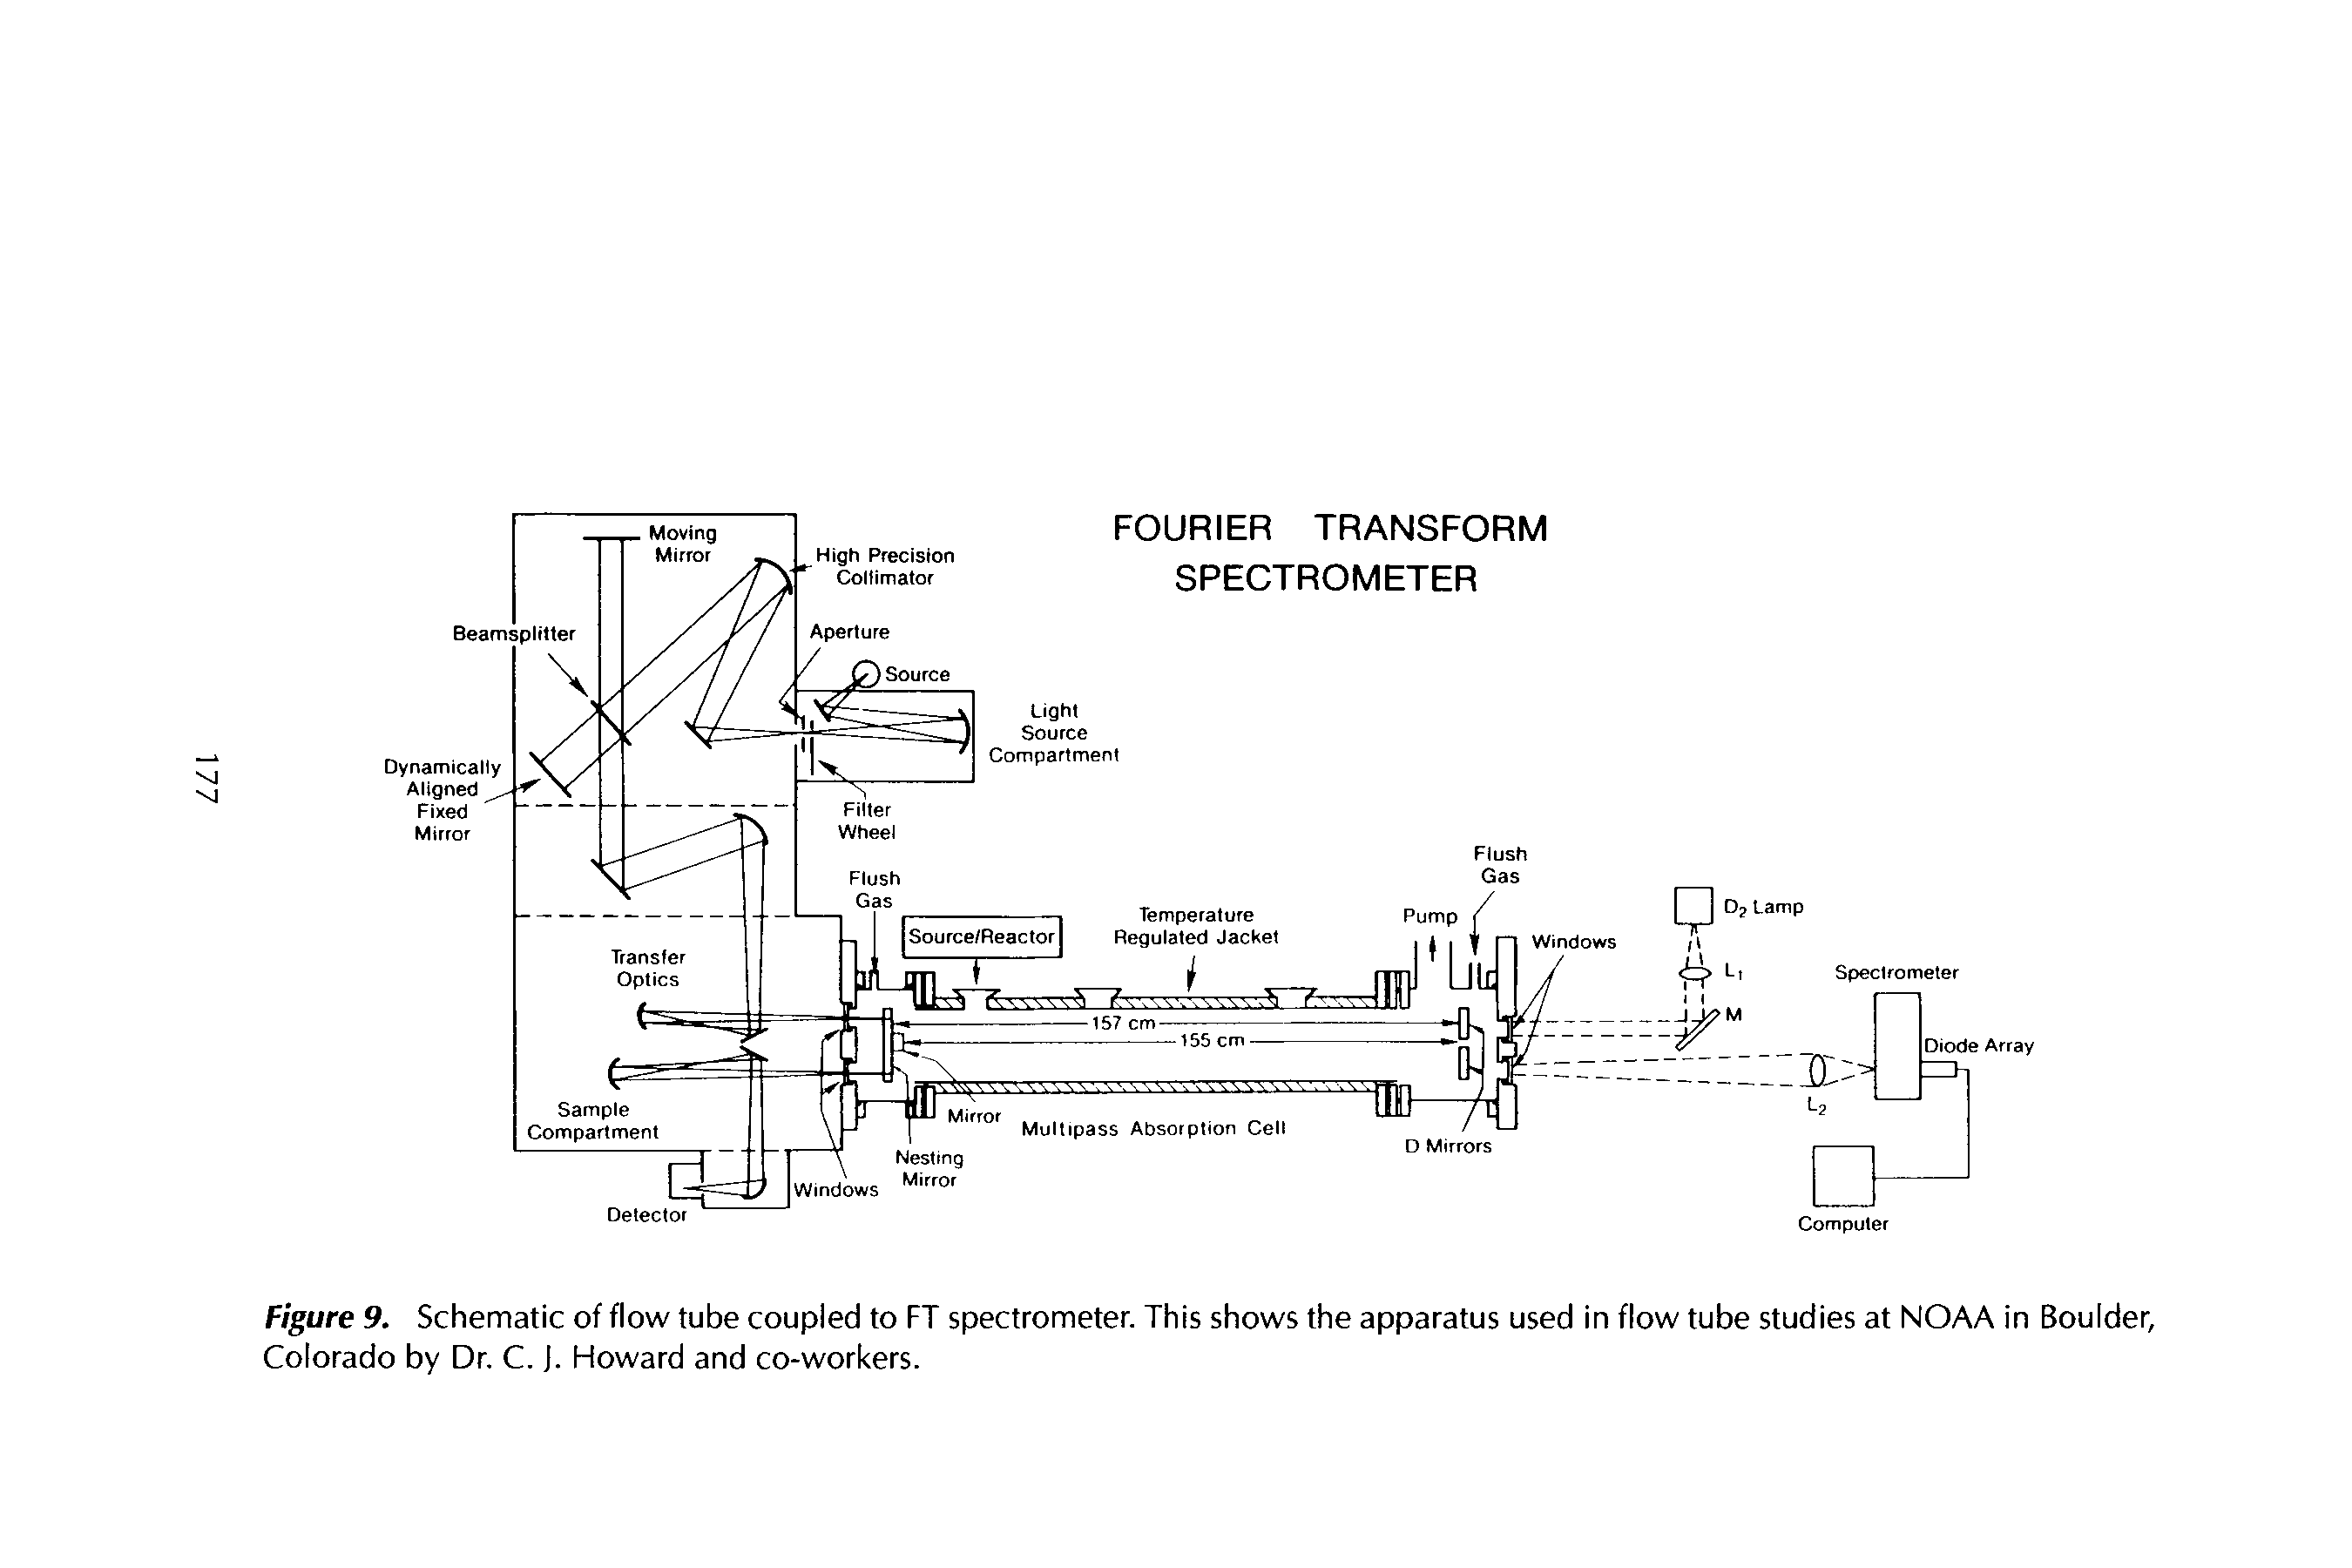 Figure 9. Schematic of flow tube coupled to FT spectrometer. This shows the apparatus used in flow tube studies at NOAA in Boulder, Colorado by Dr. C. J. Howard and co-workers.